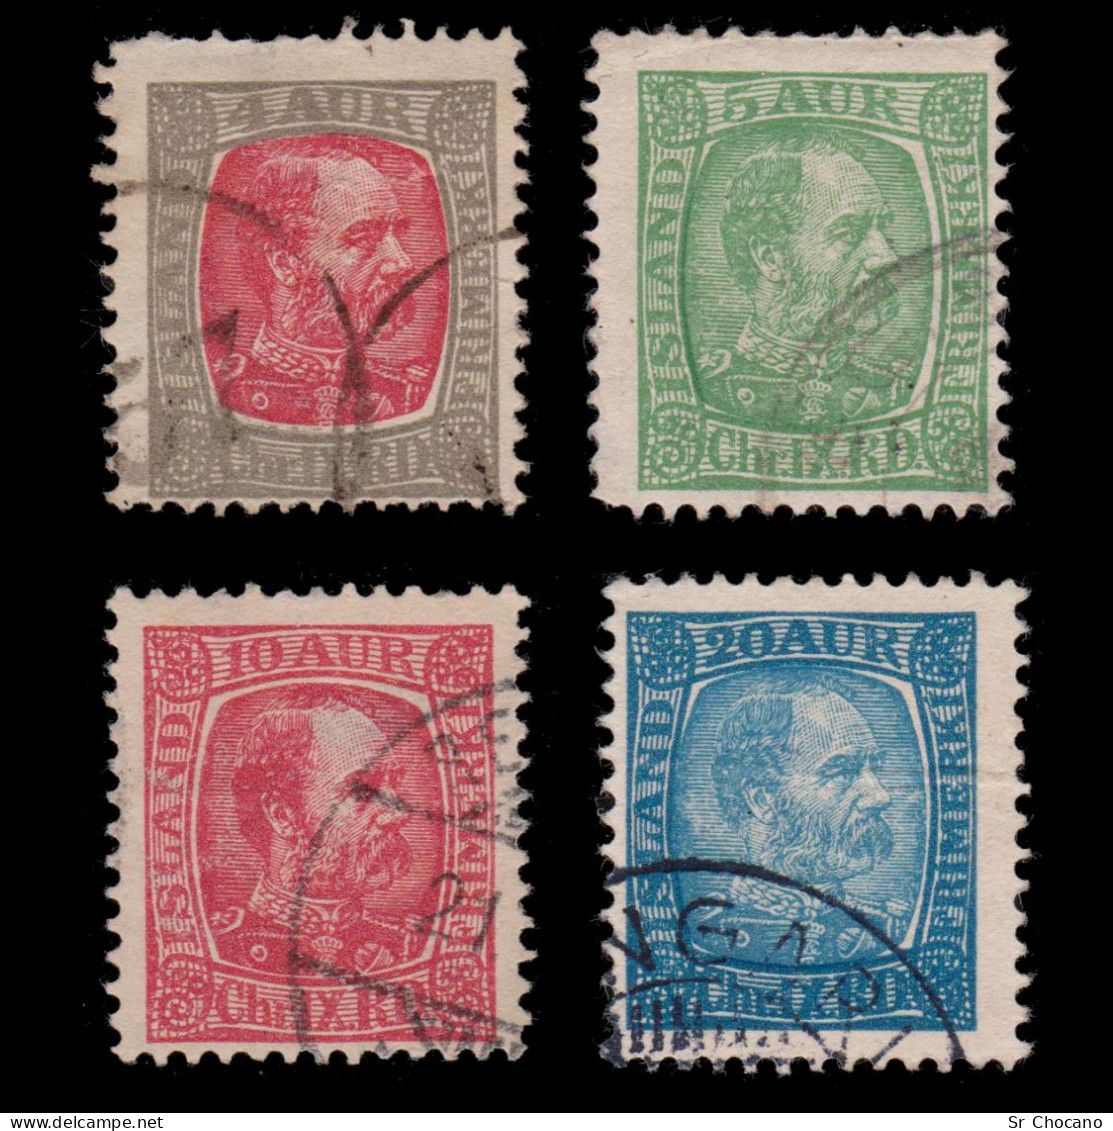 ICELAND STAMPS.1902-04.King Christian IX.Set 4.USED. - Used Stamps